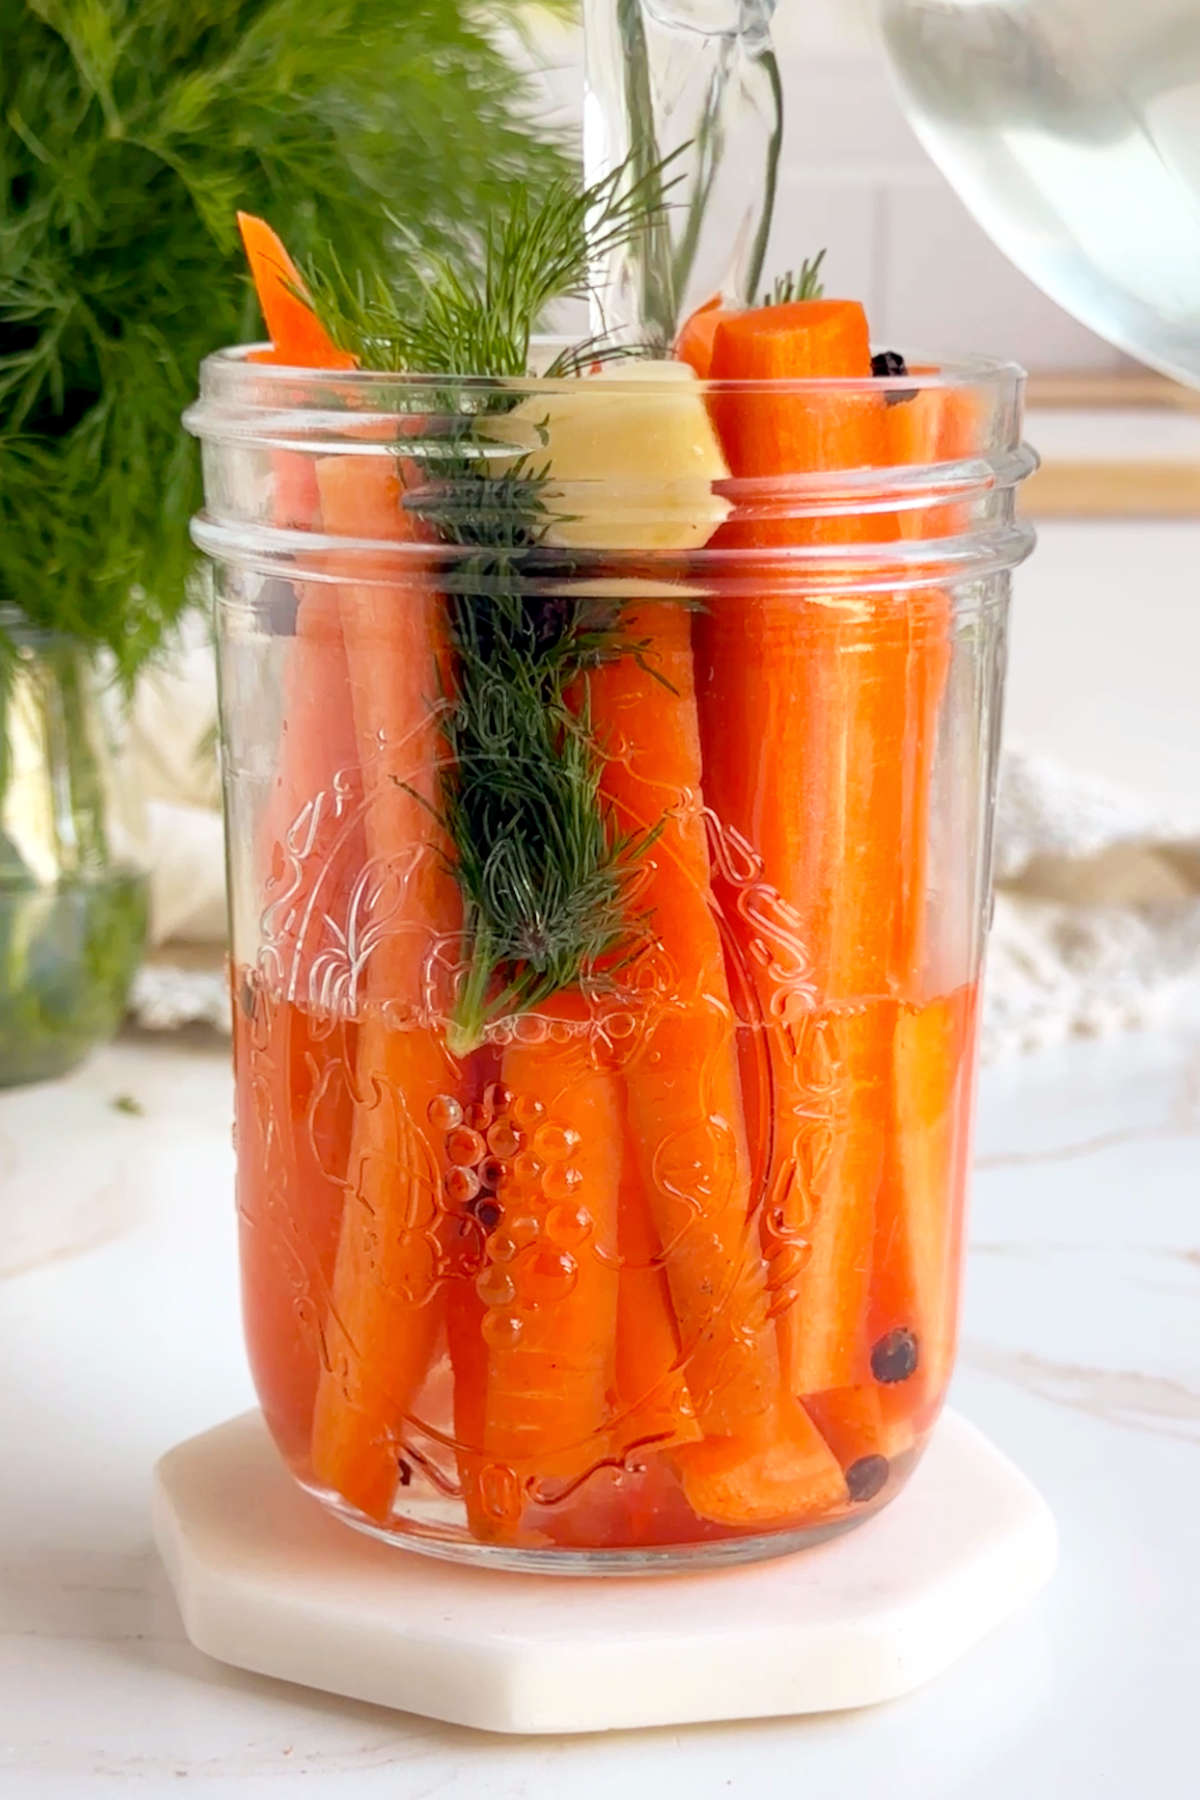 Pickling brine being poured over the carrots and mix-ins in a glass jar.